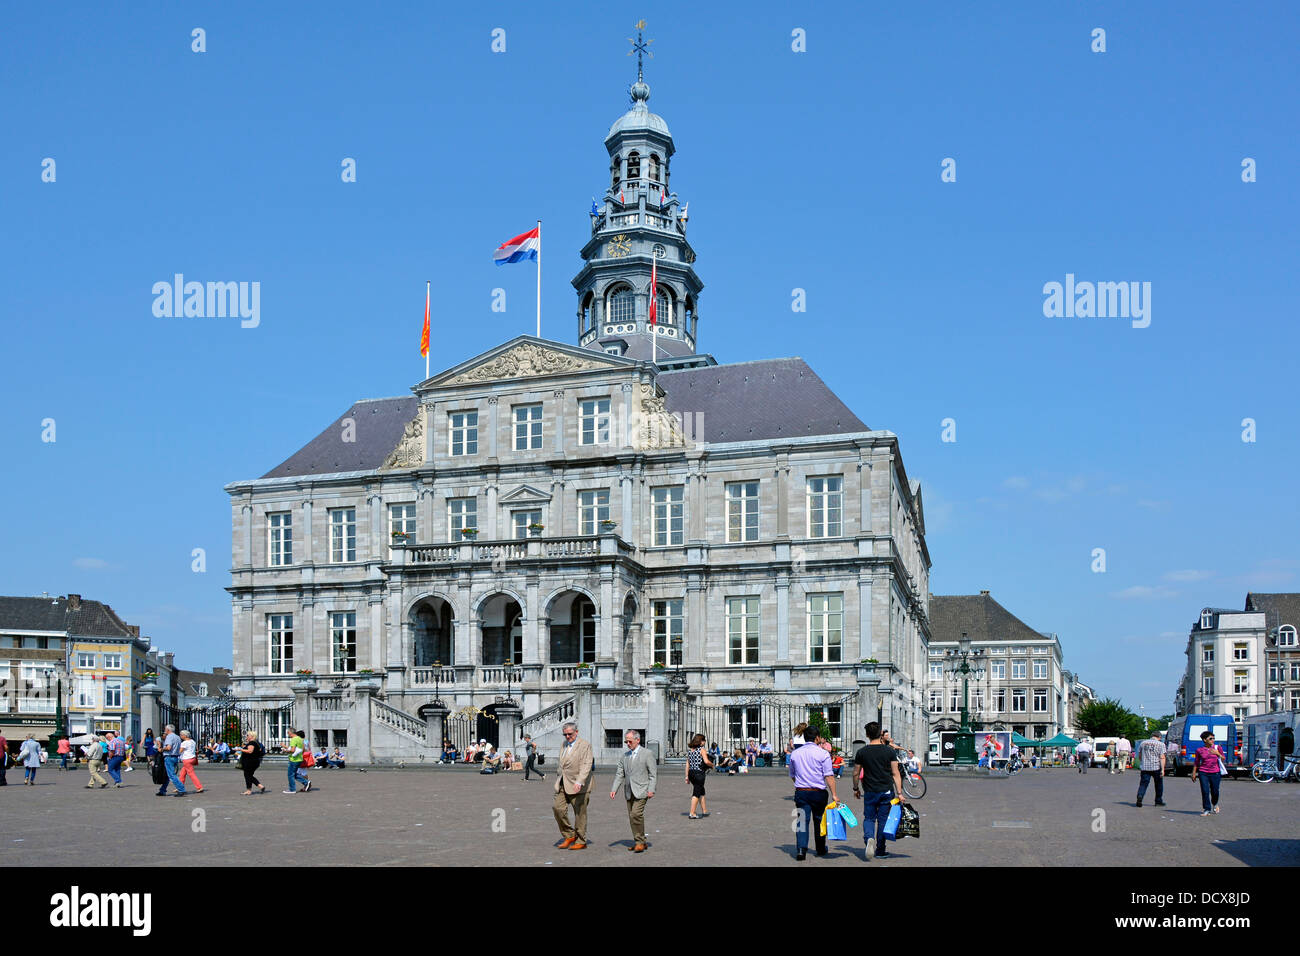 Maastricht historical town hall building people in the main market square on a sunny blue sky summer non market day in Limburg Netherlands Europe EU Stock Photo